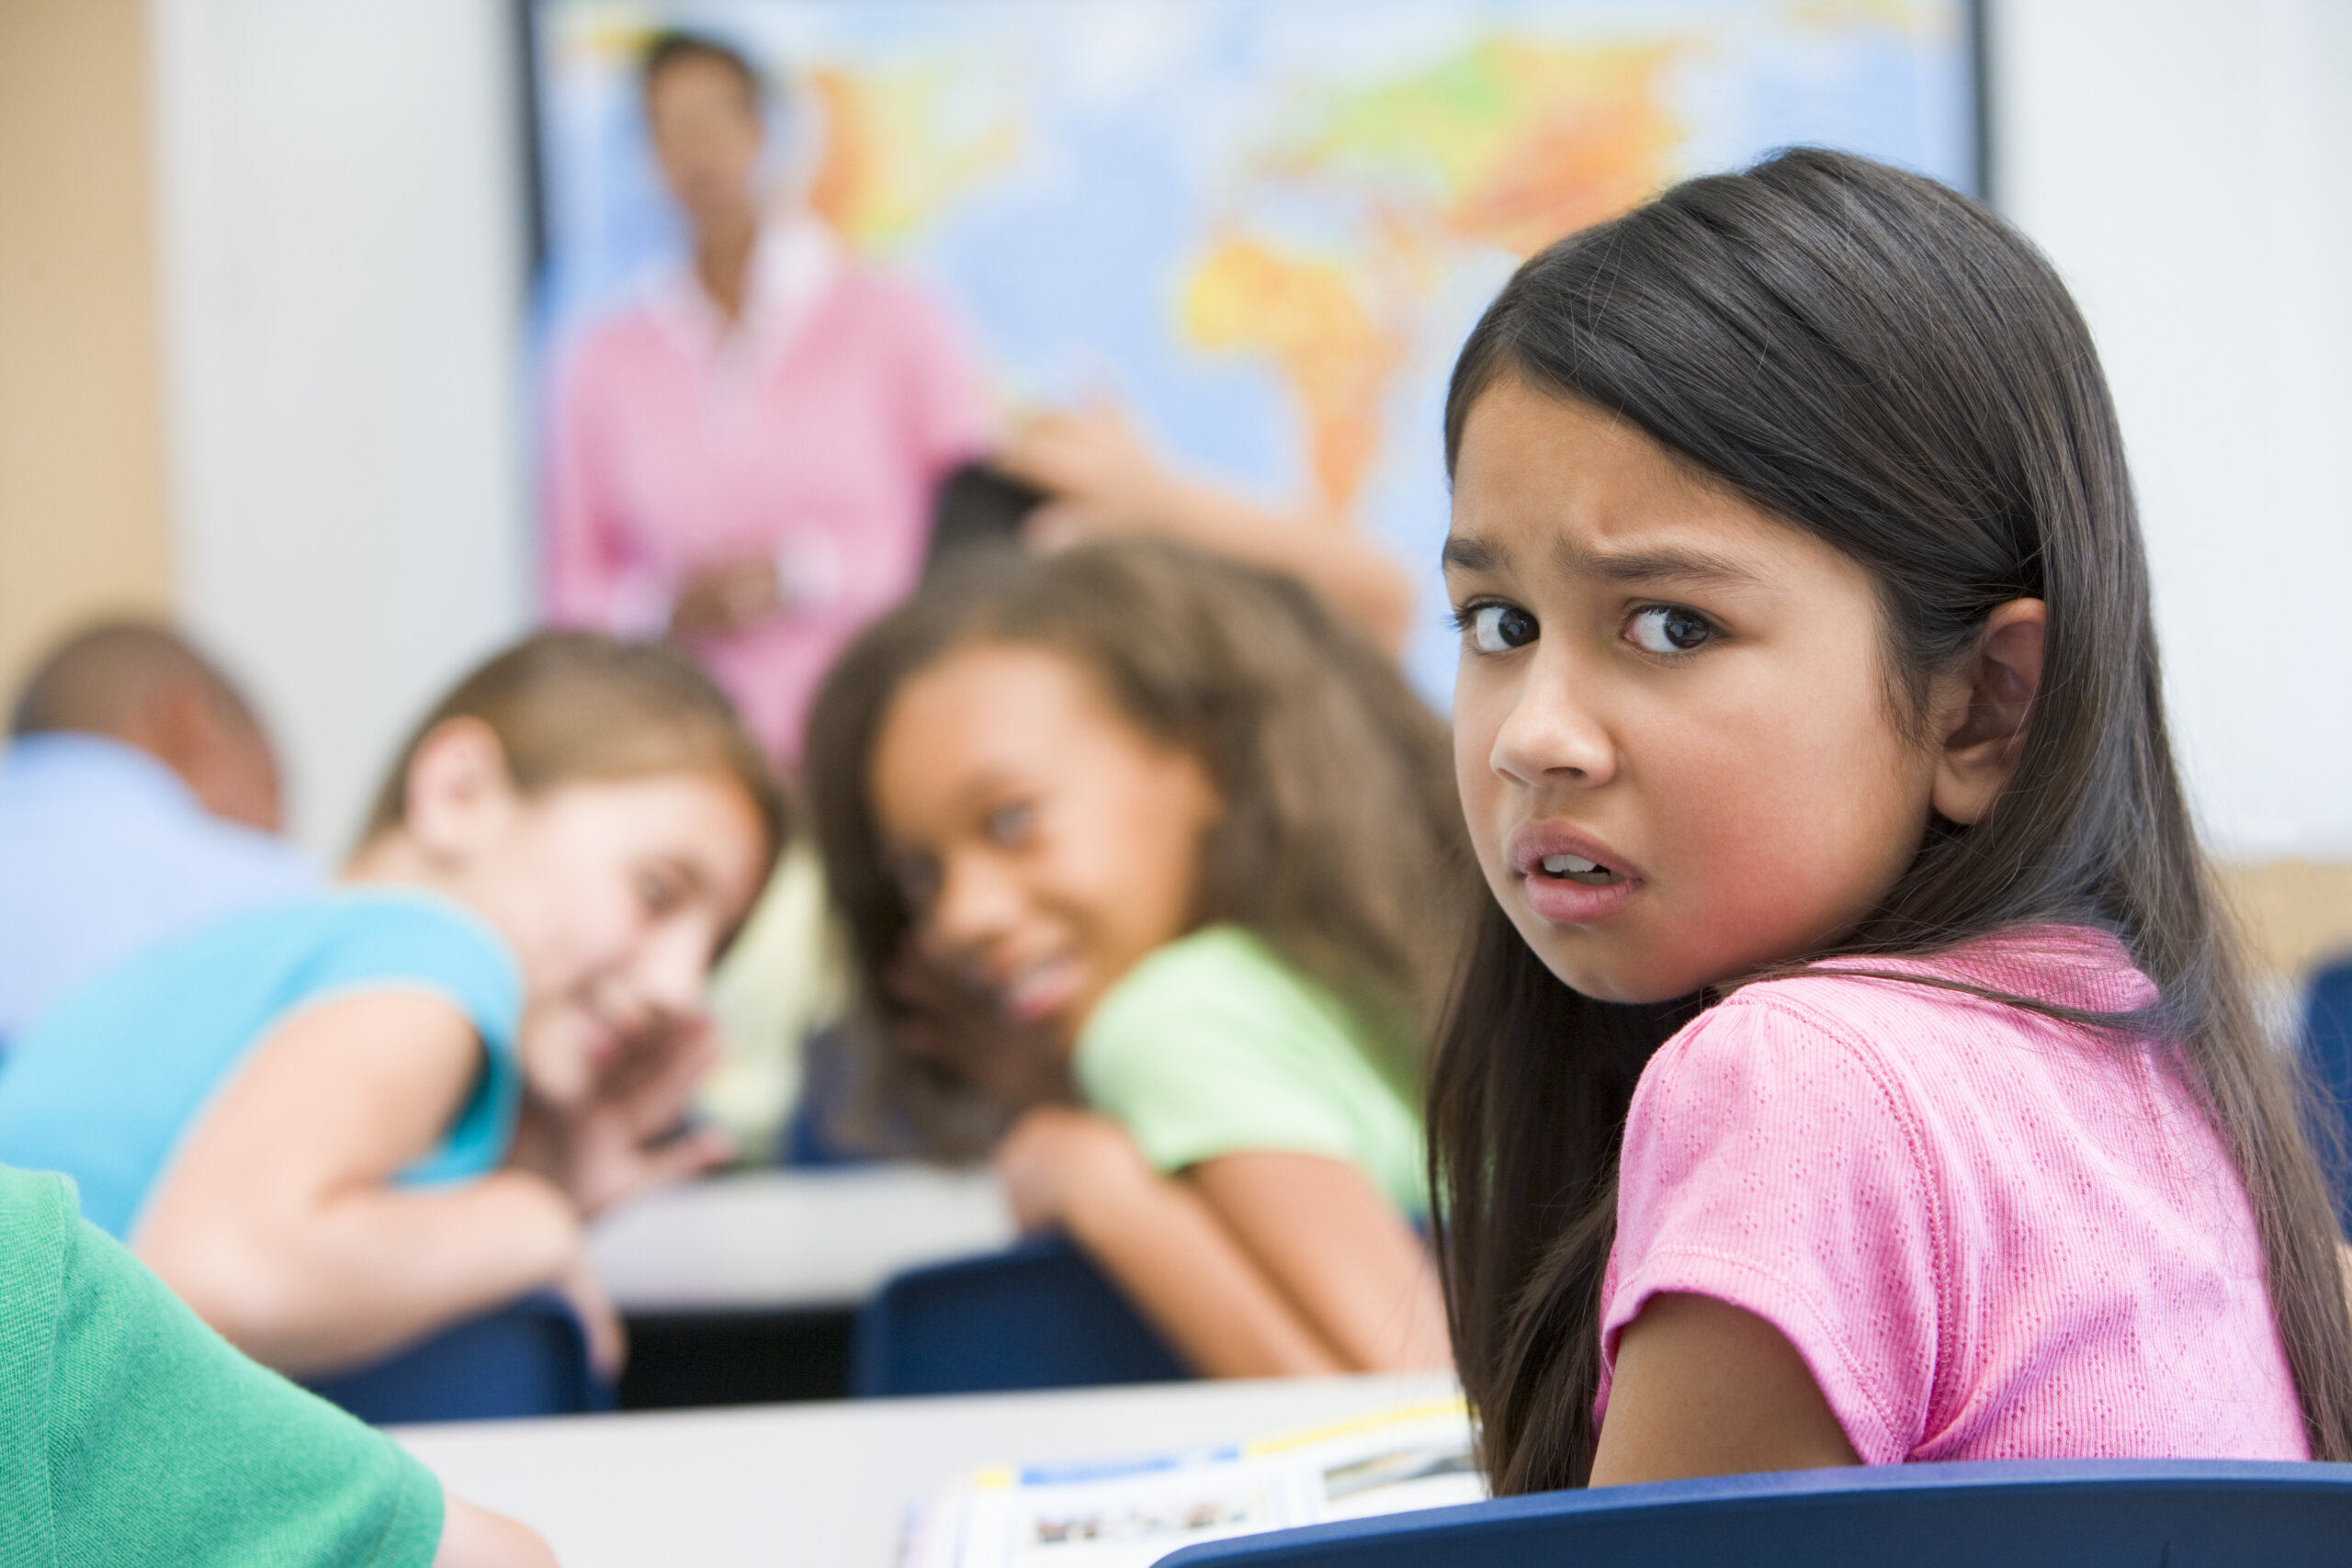 Educators can prevent bullying in the classroom by learning how to recognize and prevent bullying.